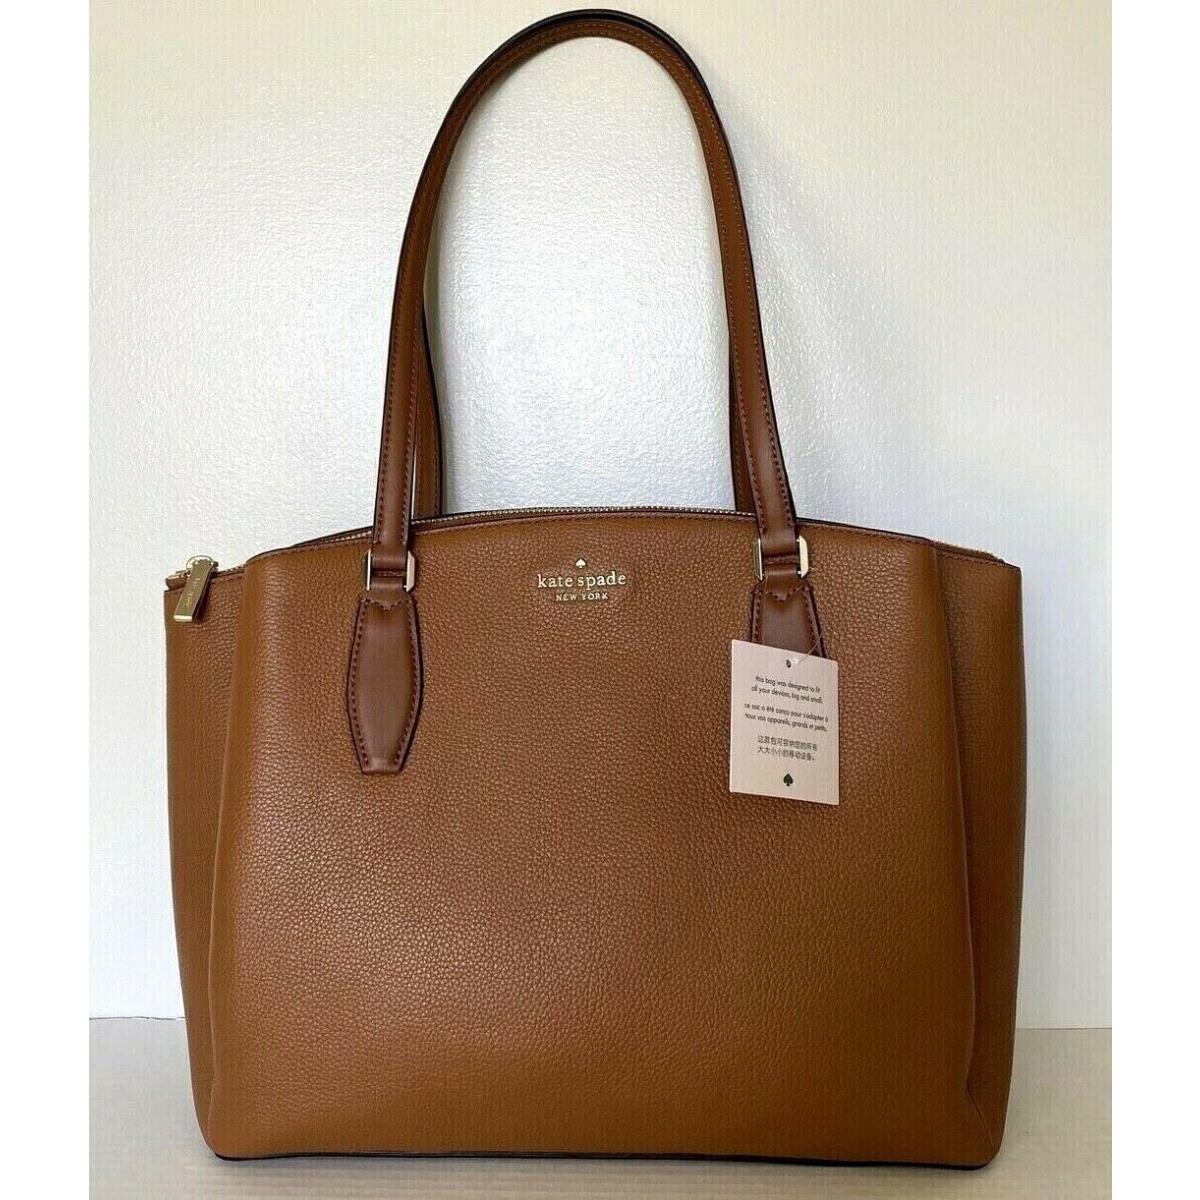 New Kate Spade Monet Large Triple Compartment Leather Tote Warm Gingerbread